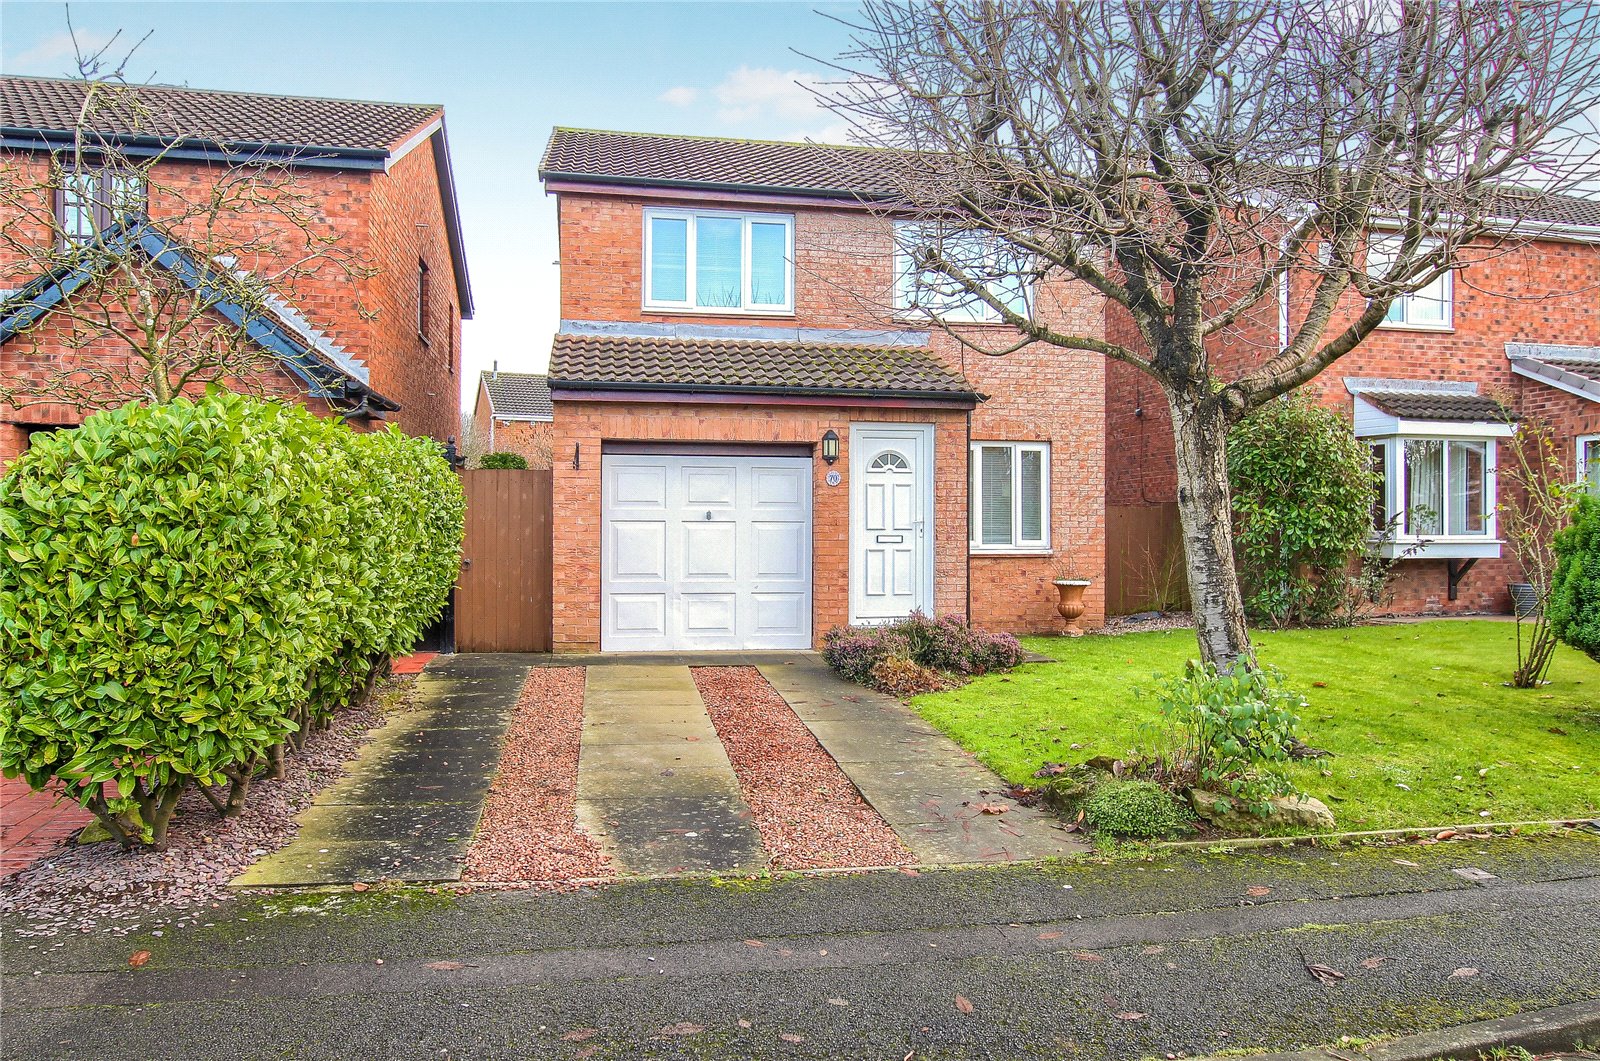 3 bed house for sale in Wolviston Court, Billingham  - Property Image 1